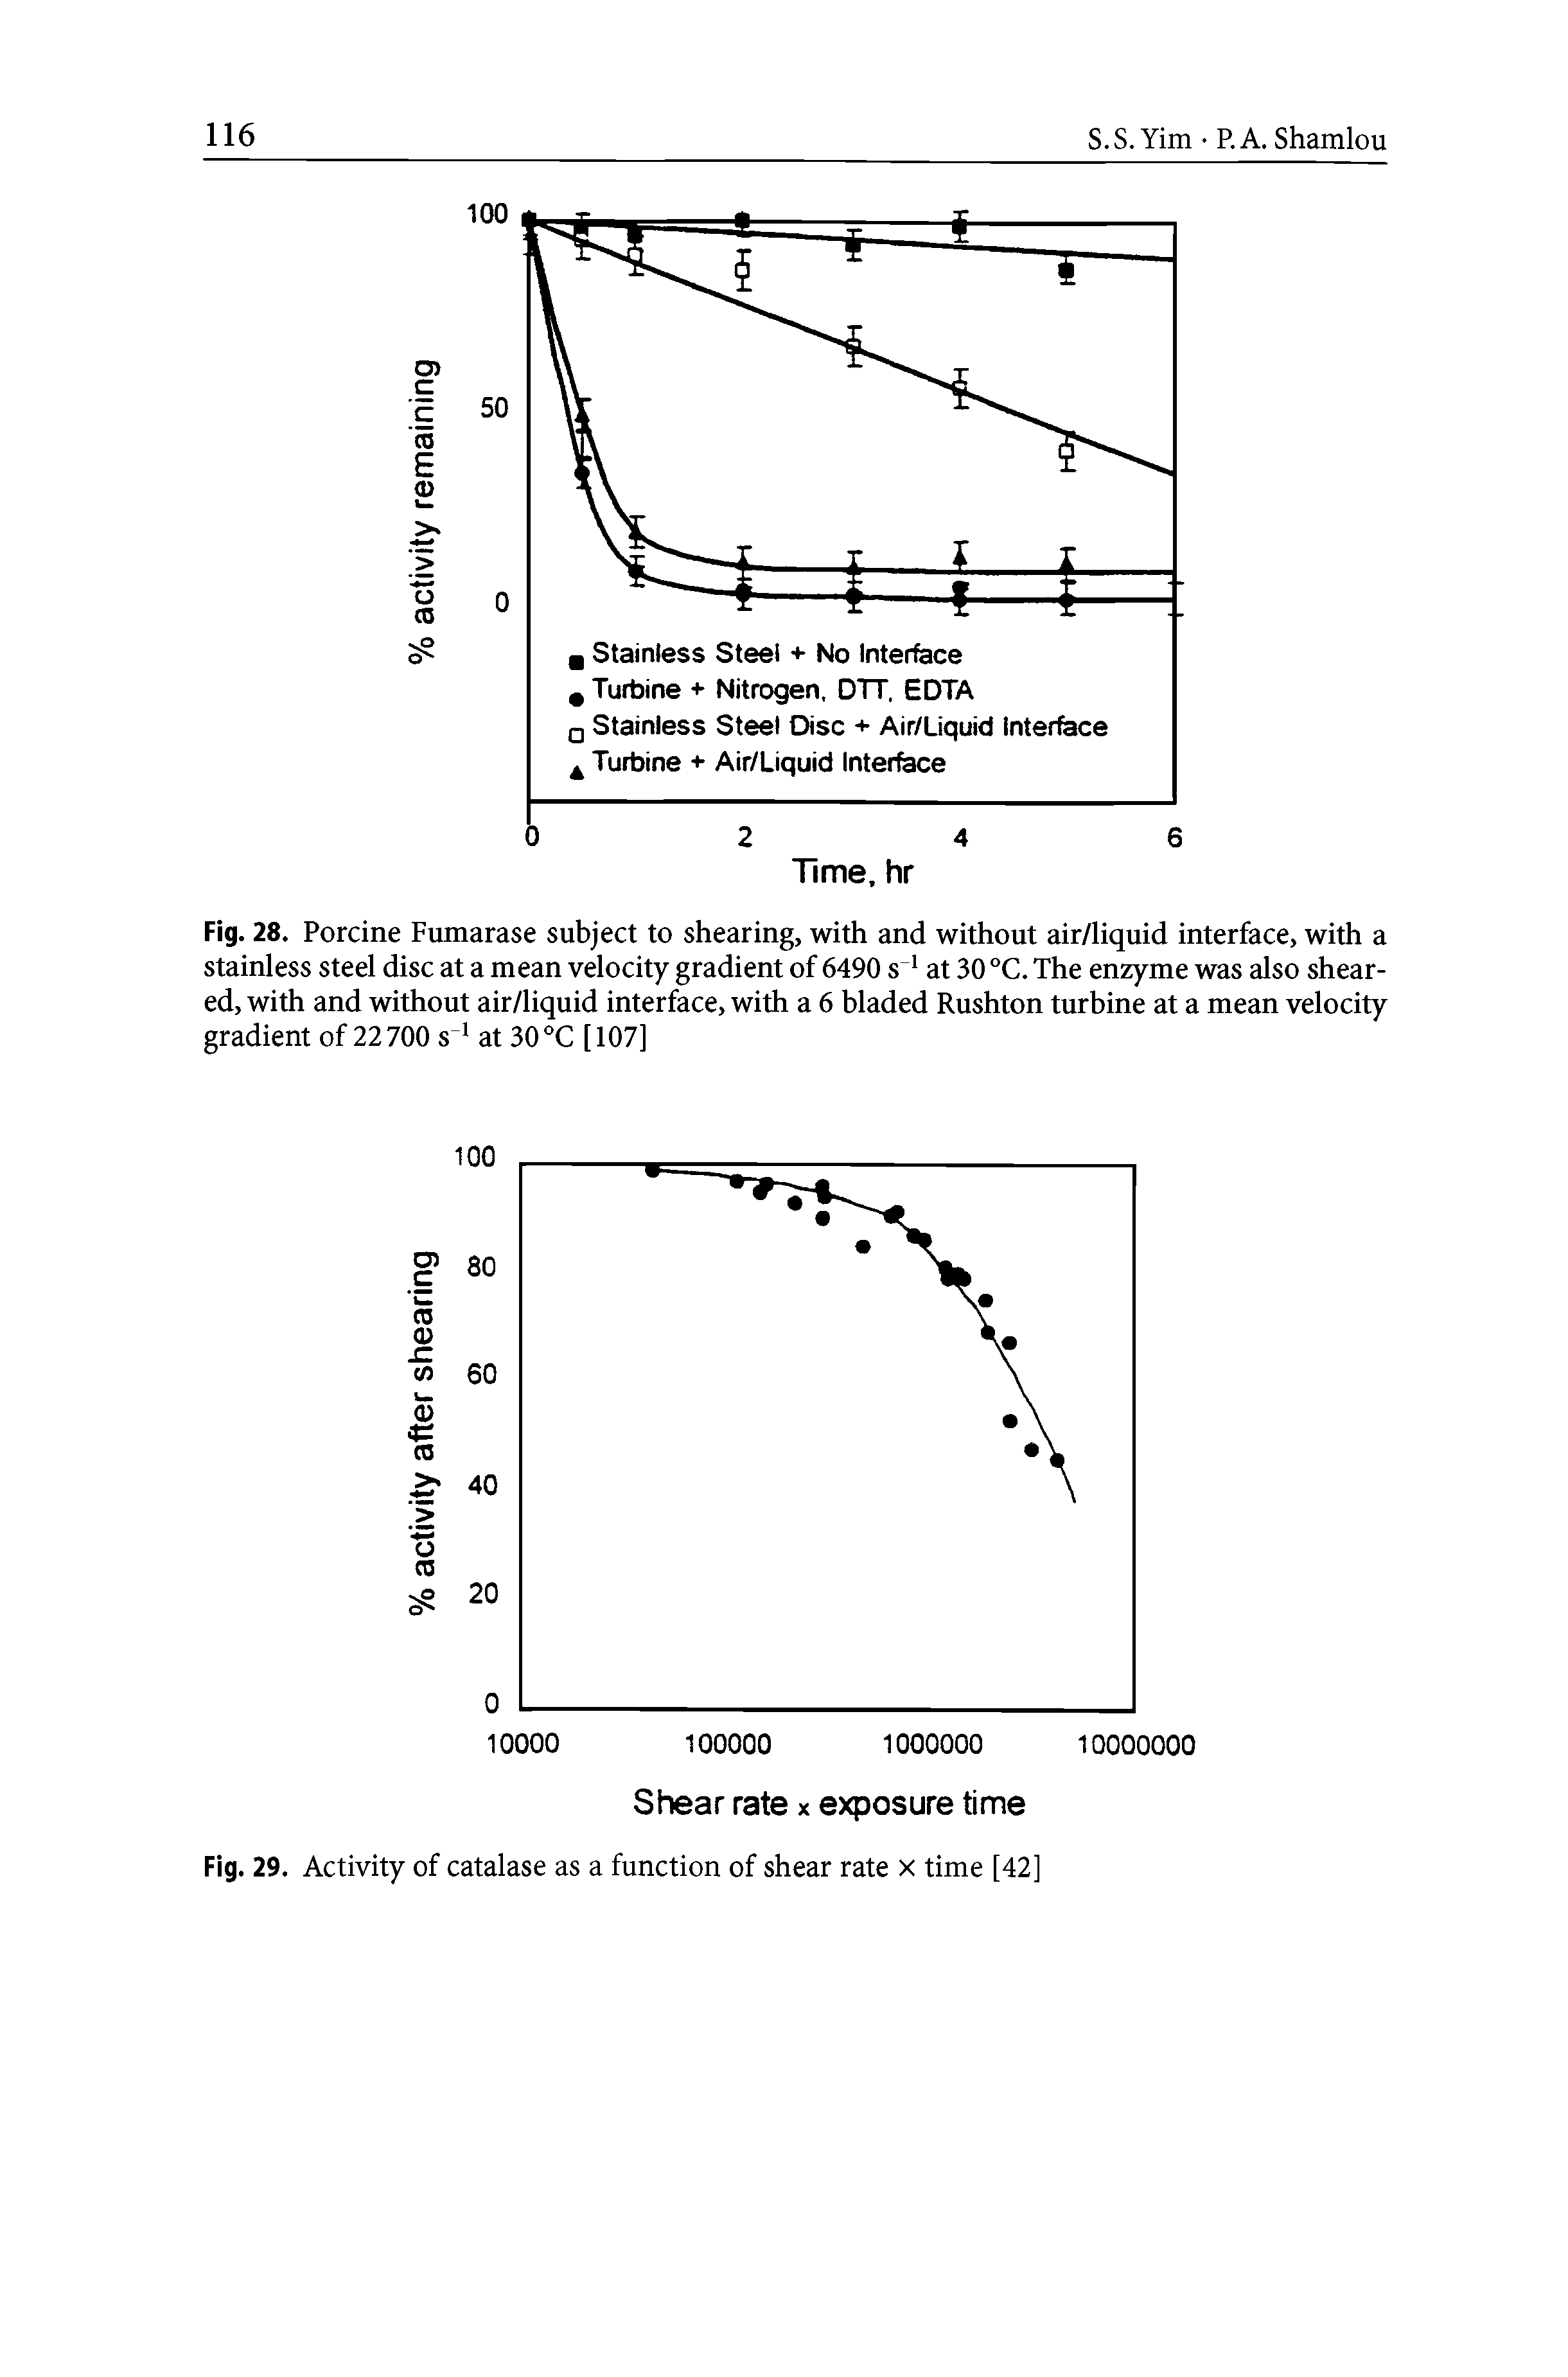 Fig. 28. Porcine Fumarase subject to shearing, with and without air/liquid interface, with a stainless steel disc at a mean velocity gradient of 6490 s at 30 °C. The enzyme was also sheared, with and without air/liquid interface, with a 6 bladed Rushton turbine at a mean velocity gradient of 22700 s at 30 °C [107]...